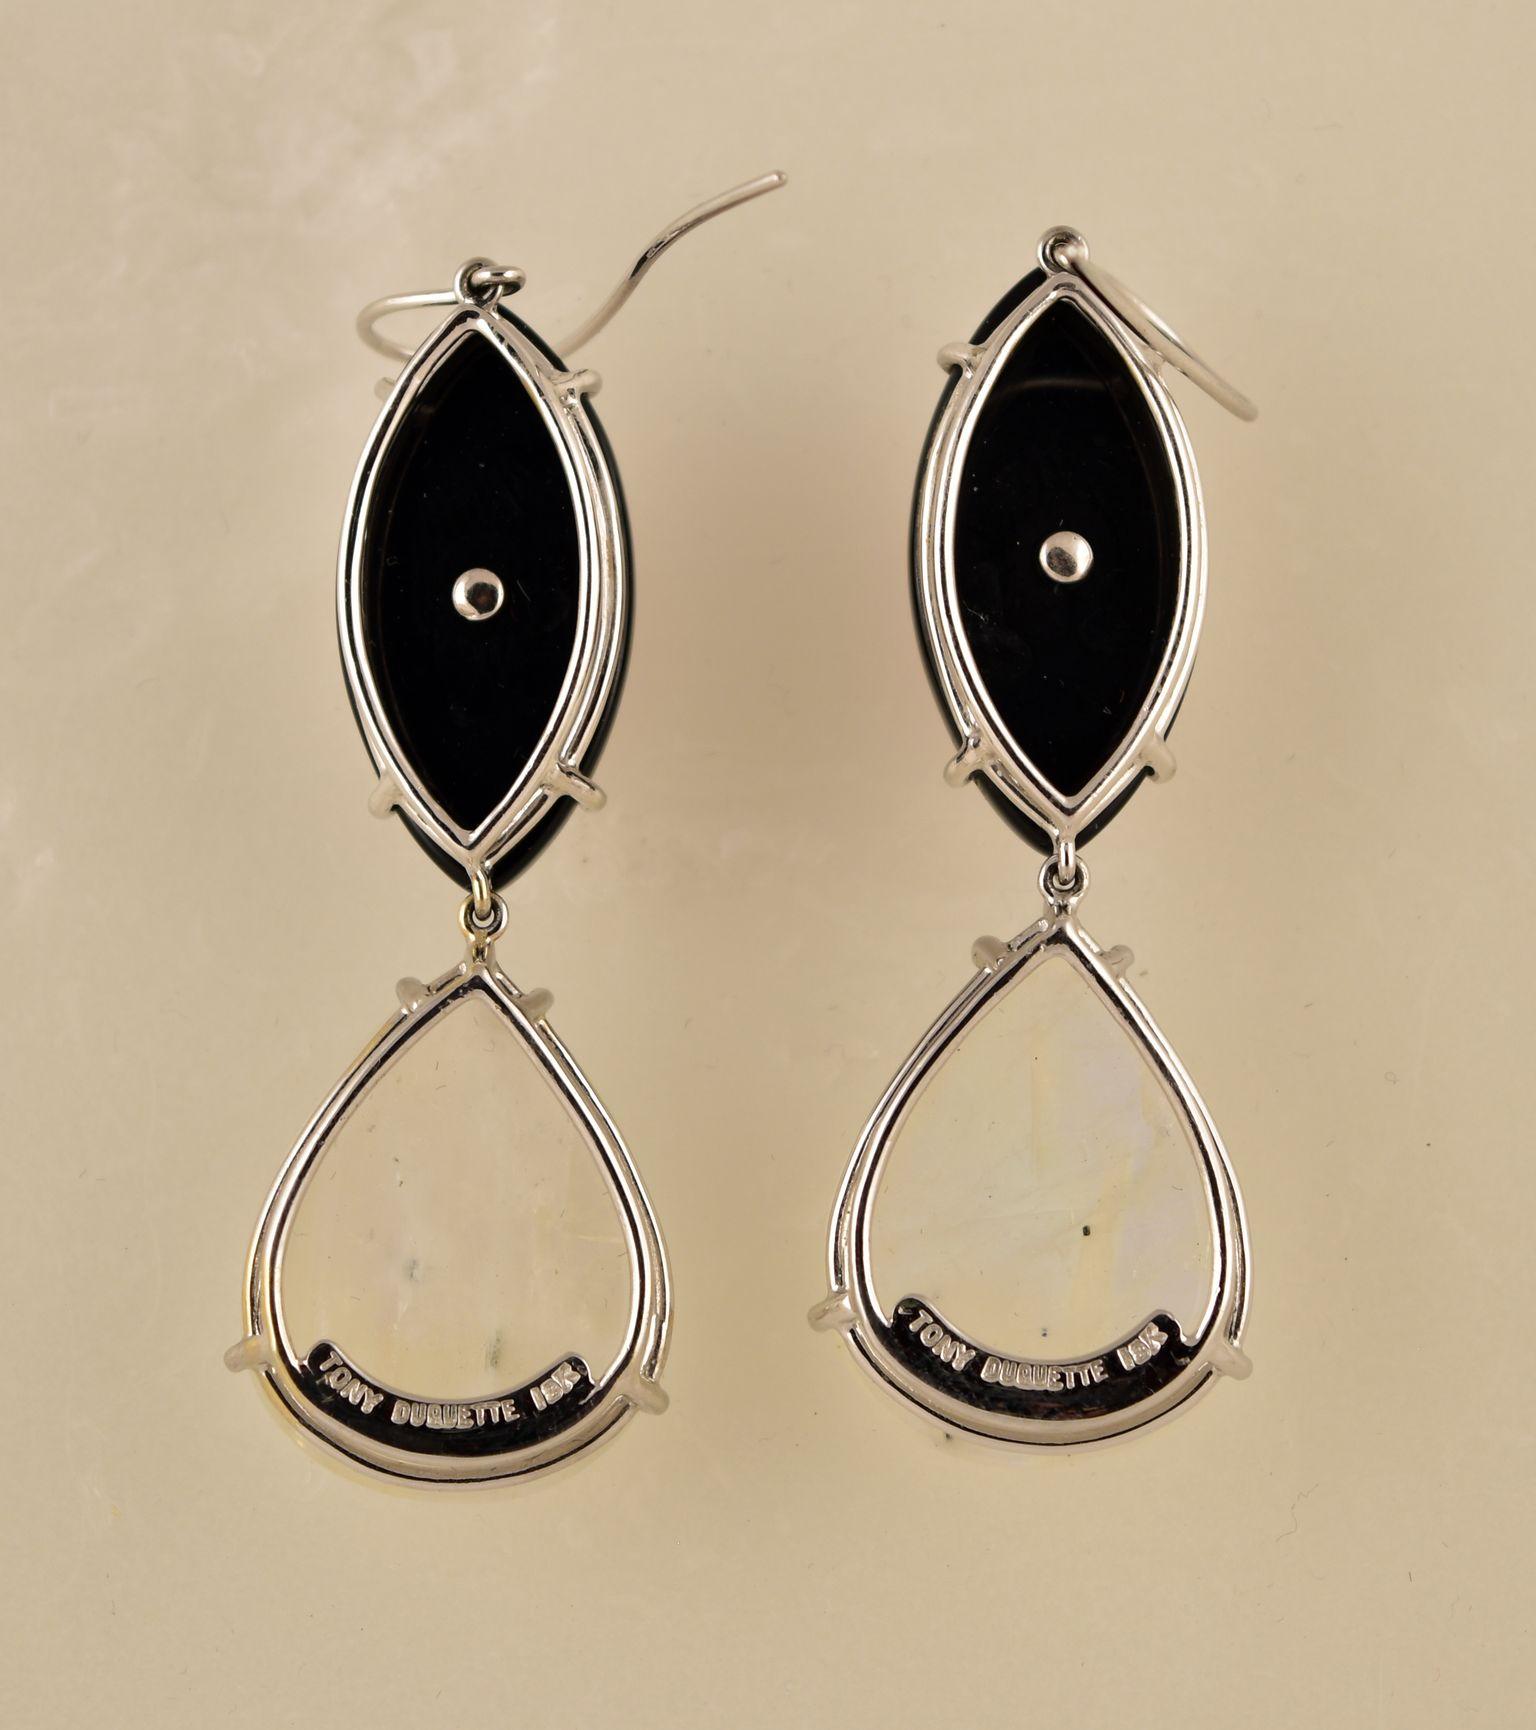 Simply Beautiful! Elegant and Finely detailed Moonstone (app. 68 total Carat weight), Coral (app. 56.8 total Carat weight), Black Onyx (app. 45 total Carat weight) Statement Earrings. Hand crafted in 18k white Gold; Signed: TONY DUQUETTE 18K;